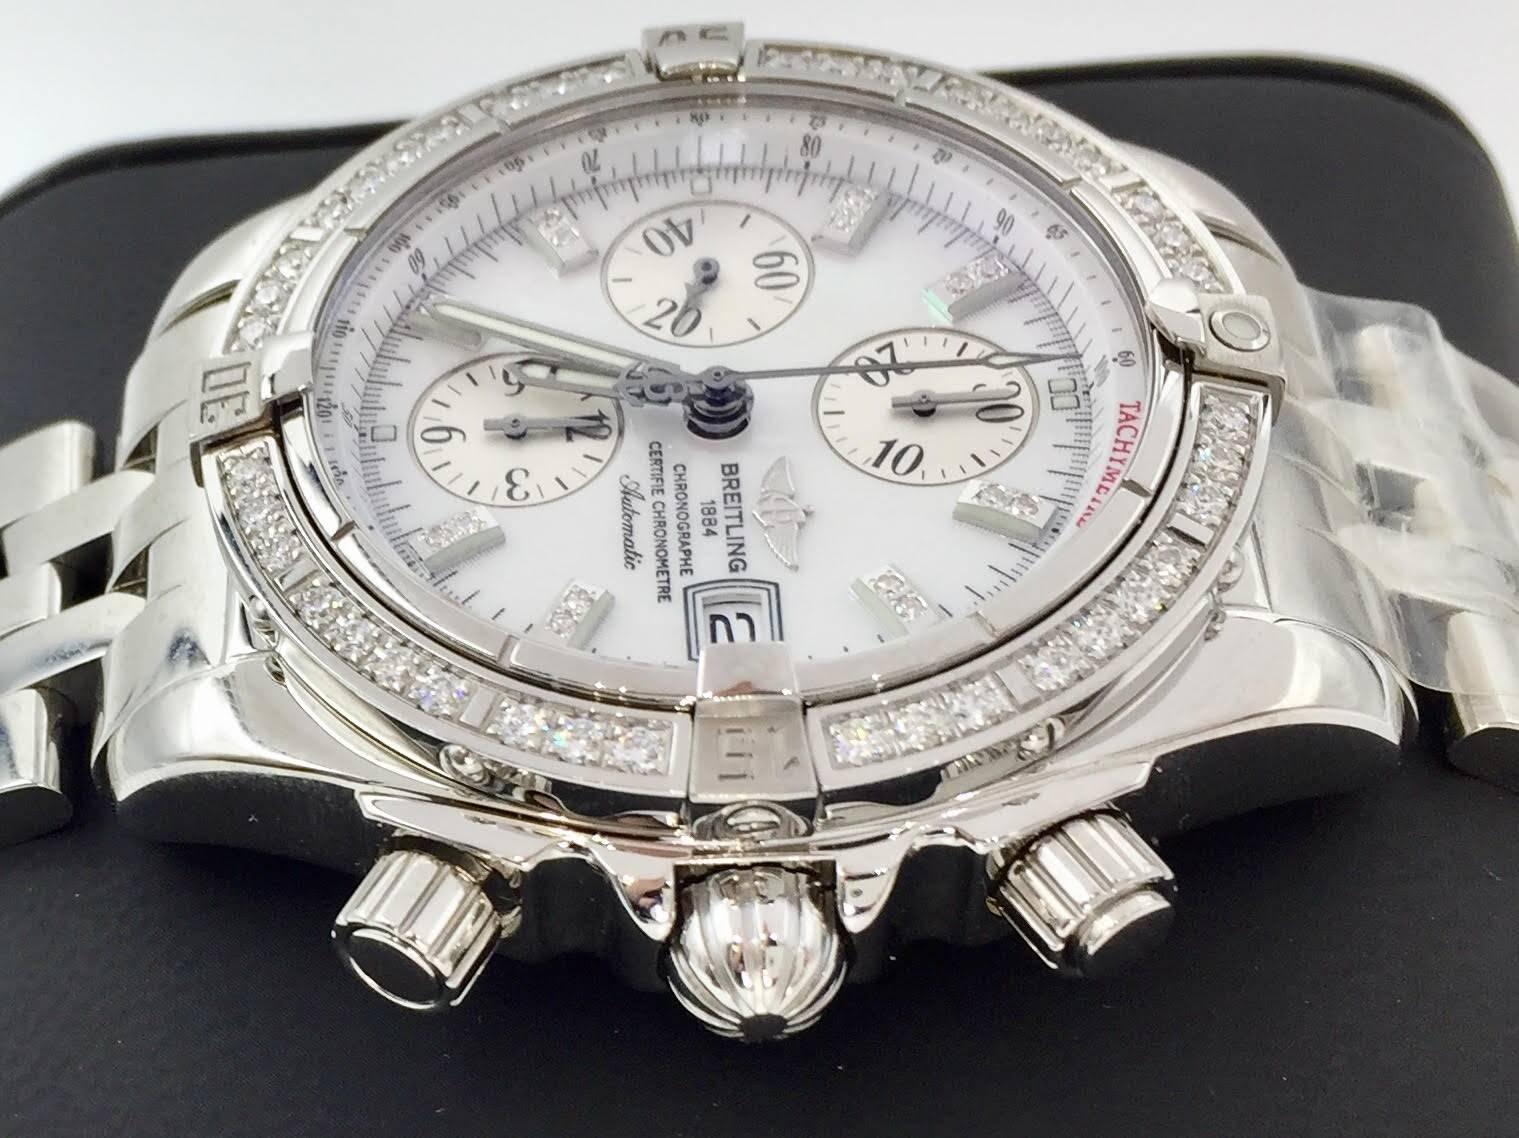 With original boxes and all authorized paperwork (official registration, Chronometre certificate, warranty, diamond information card)
Model Number: A1335653/A570
Serial Number: 2382738
Movement: Automatic
Stainless Steel Bezel and Mother of Pearl